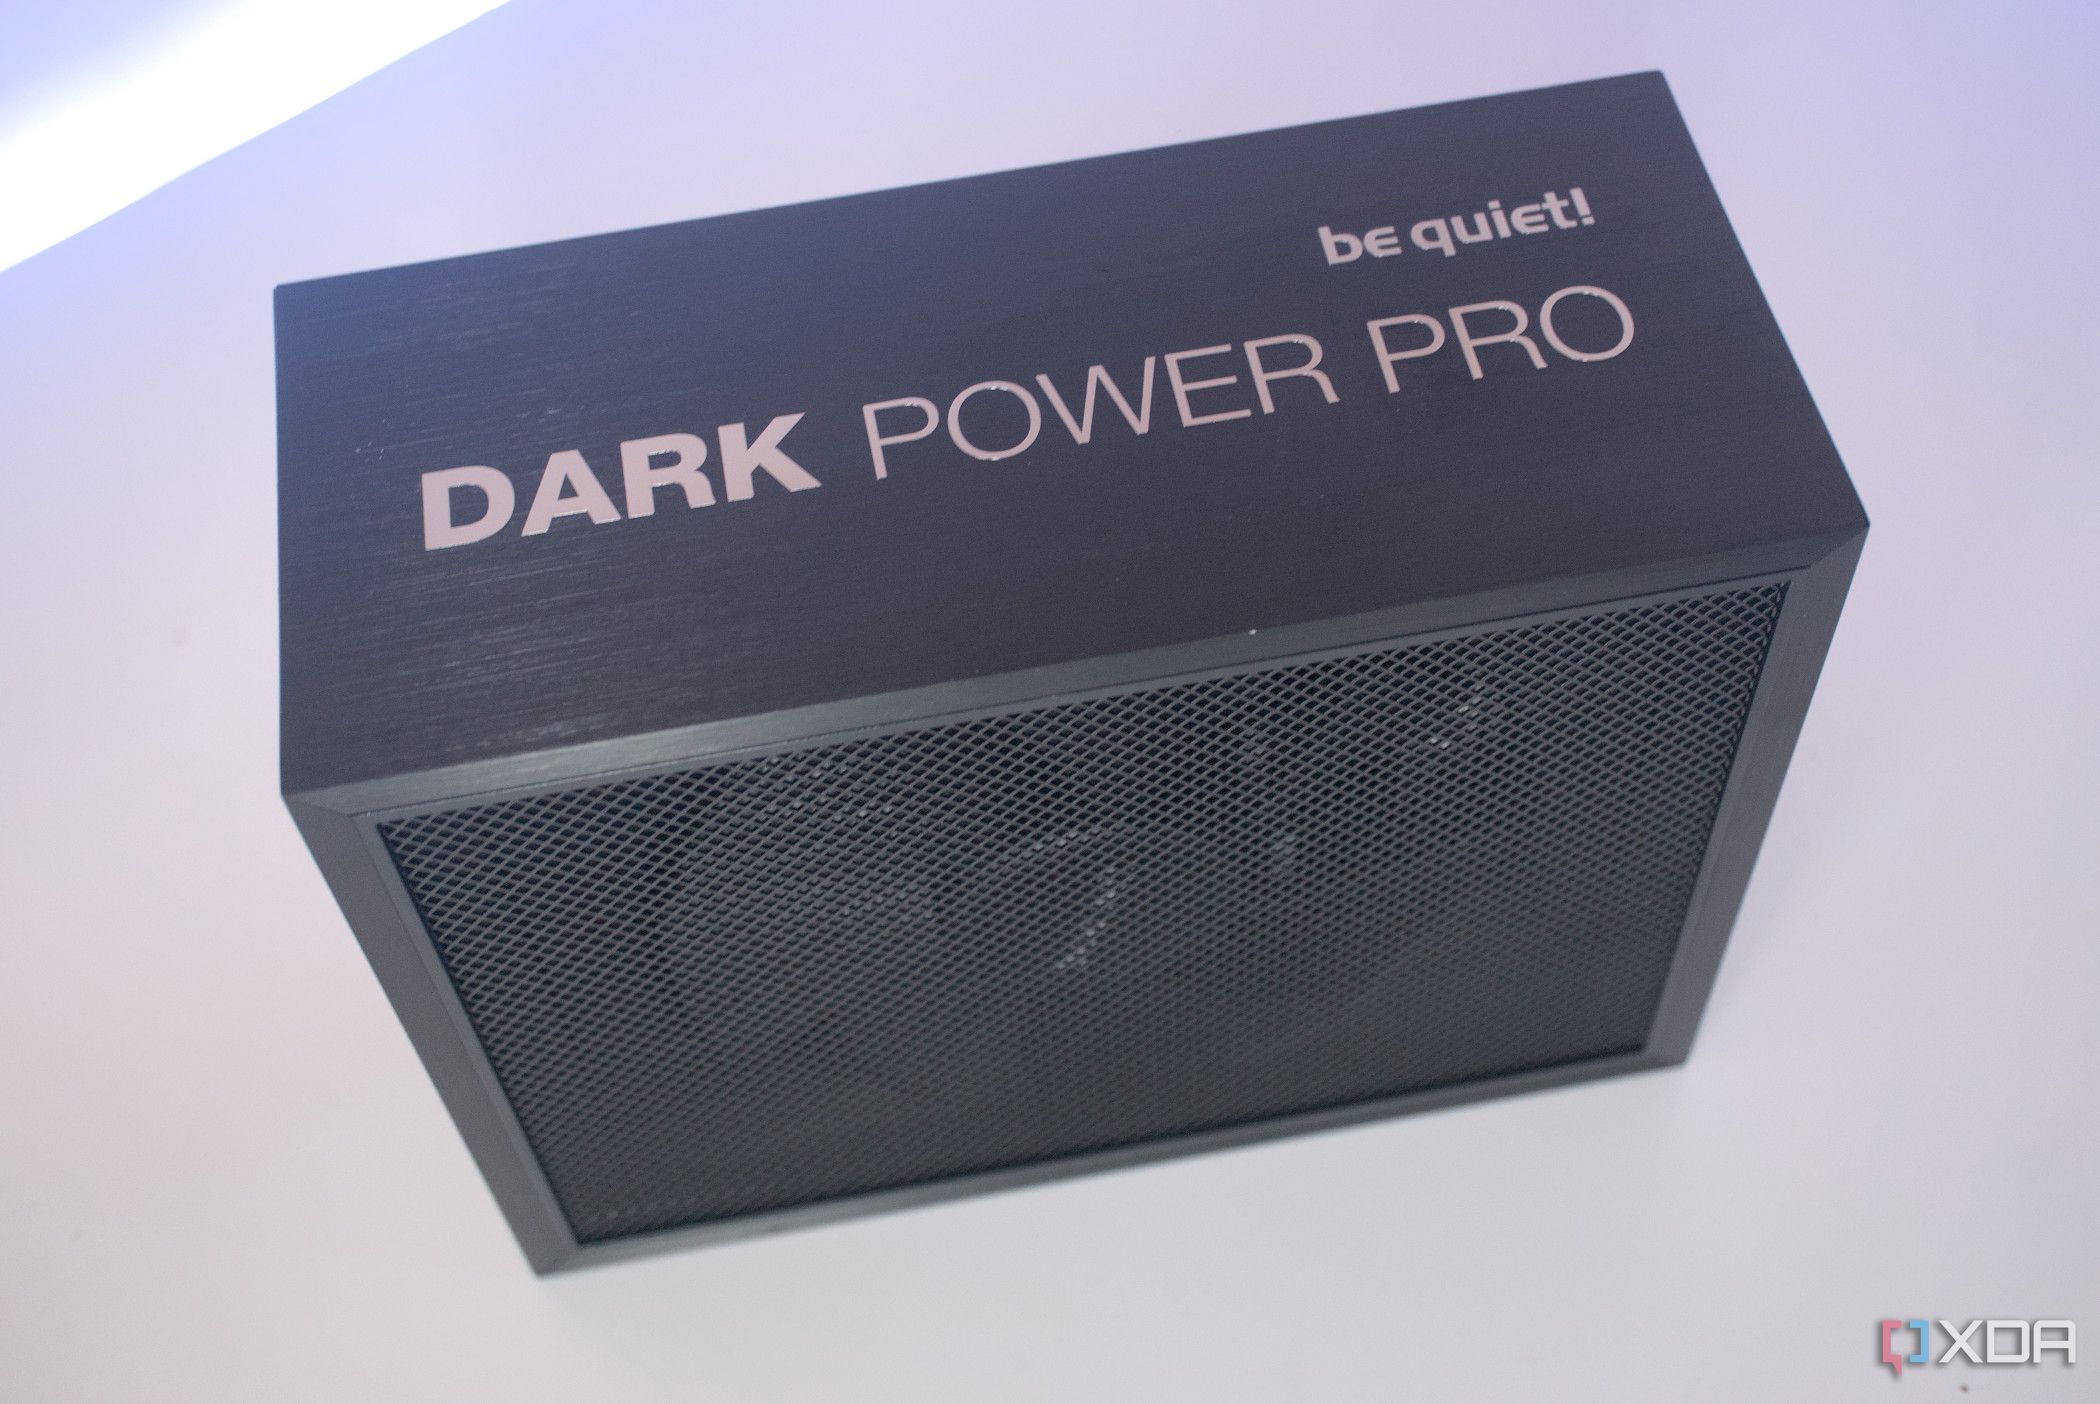 be quiet! Dark Power Pro 13 1300W review: The best enthusiast power supply